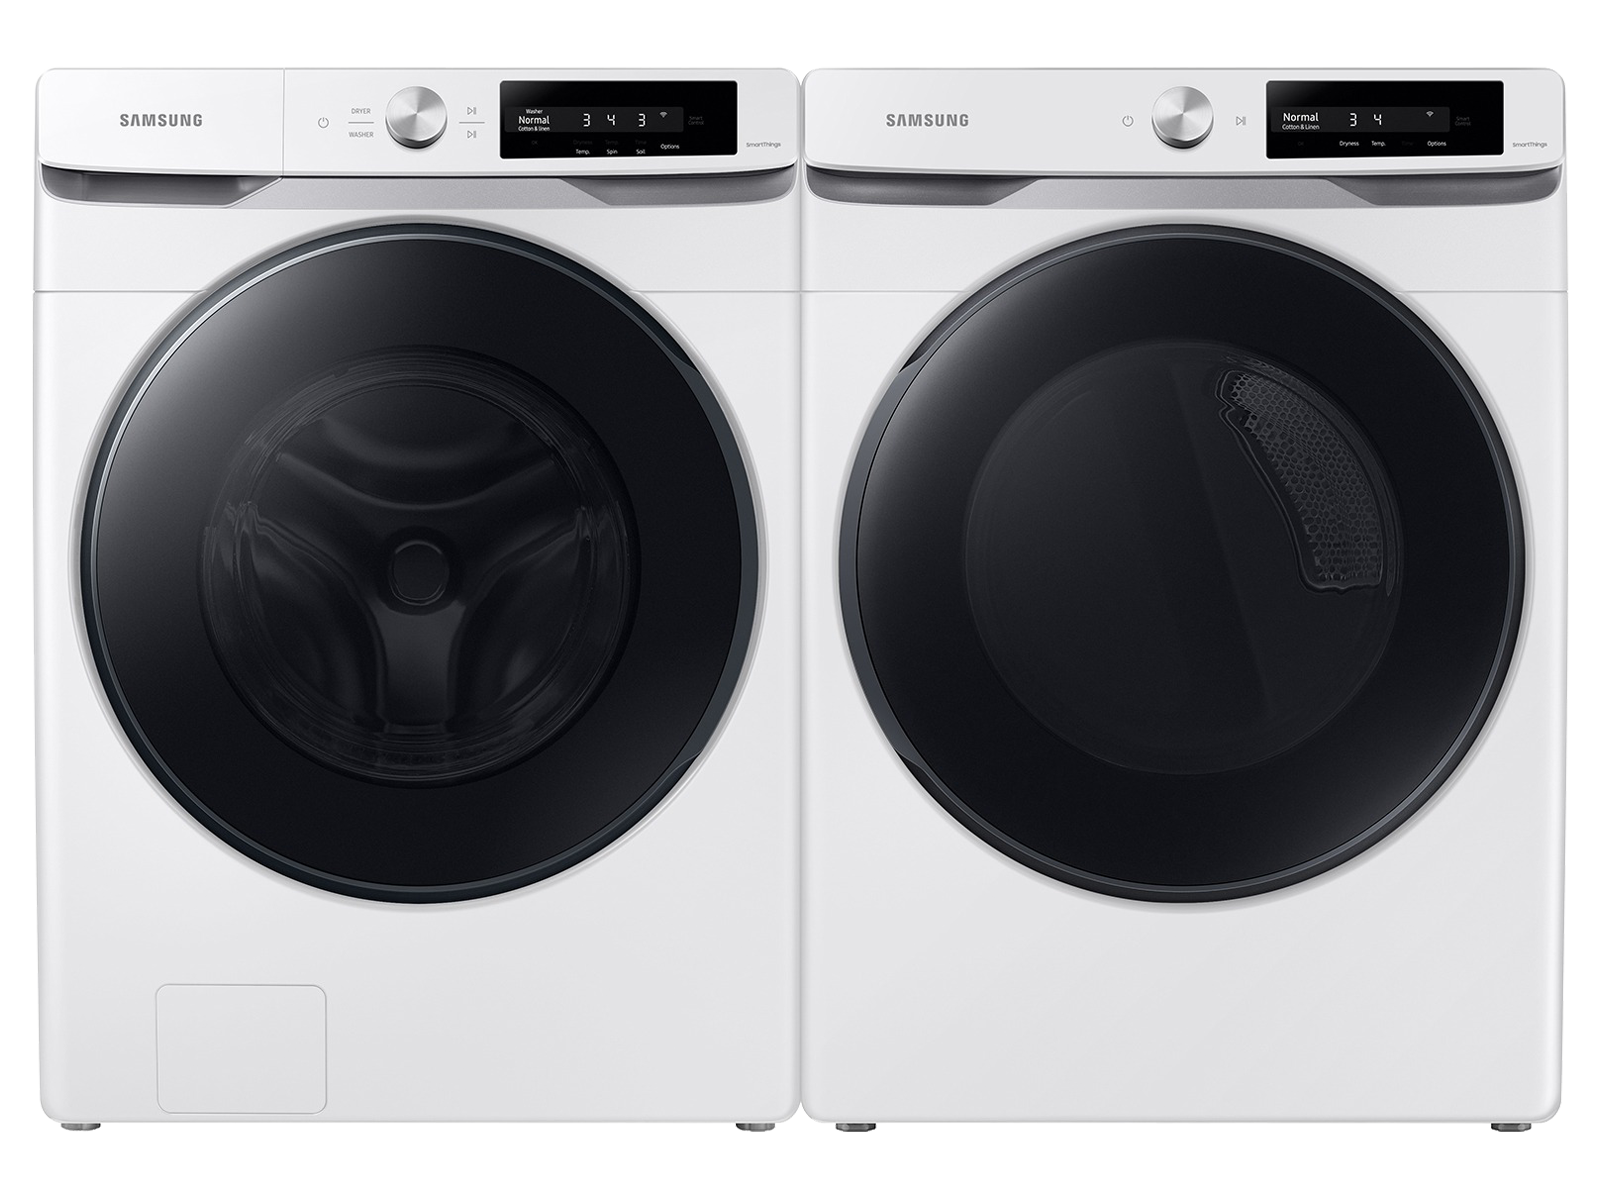 Photos - Washing Machine Samsung Smart Dial Front Load Super Speed Wash Washer and Smart Dial Super 